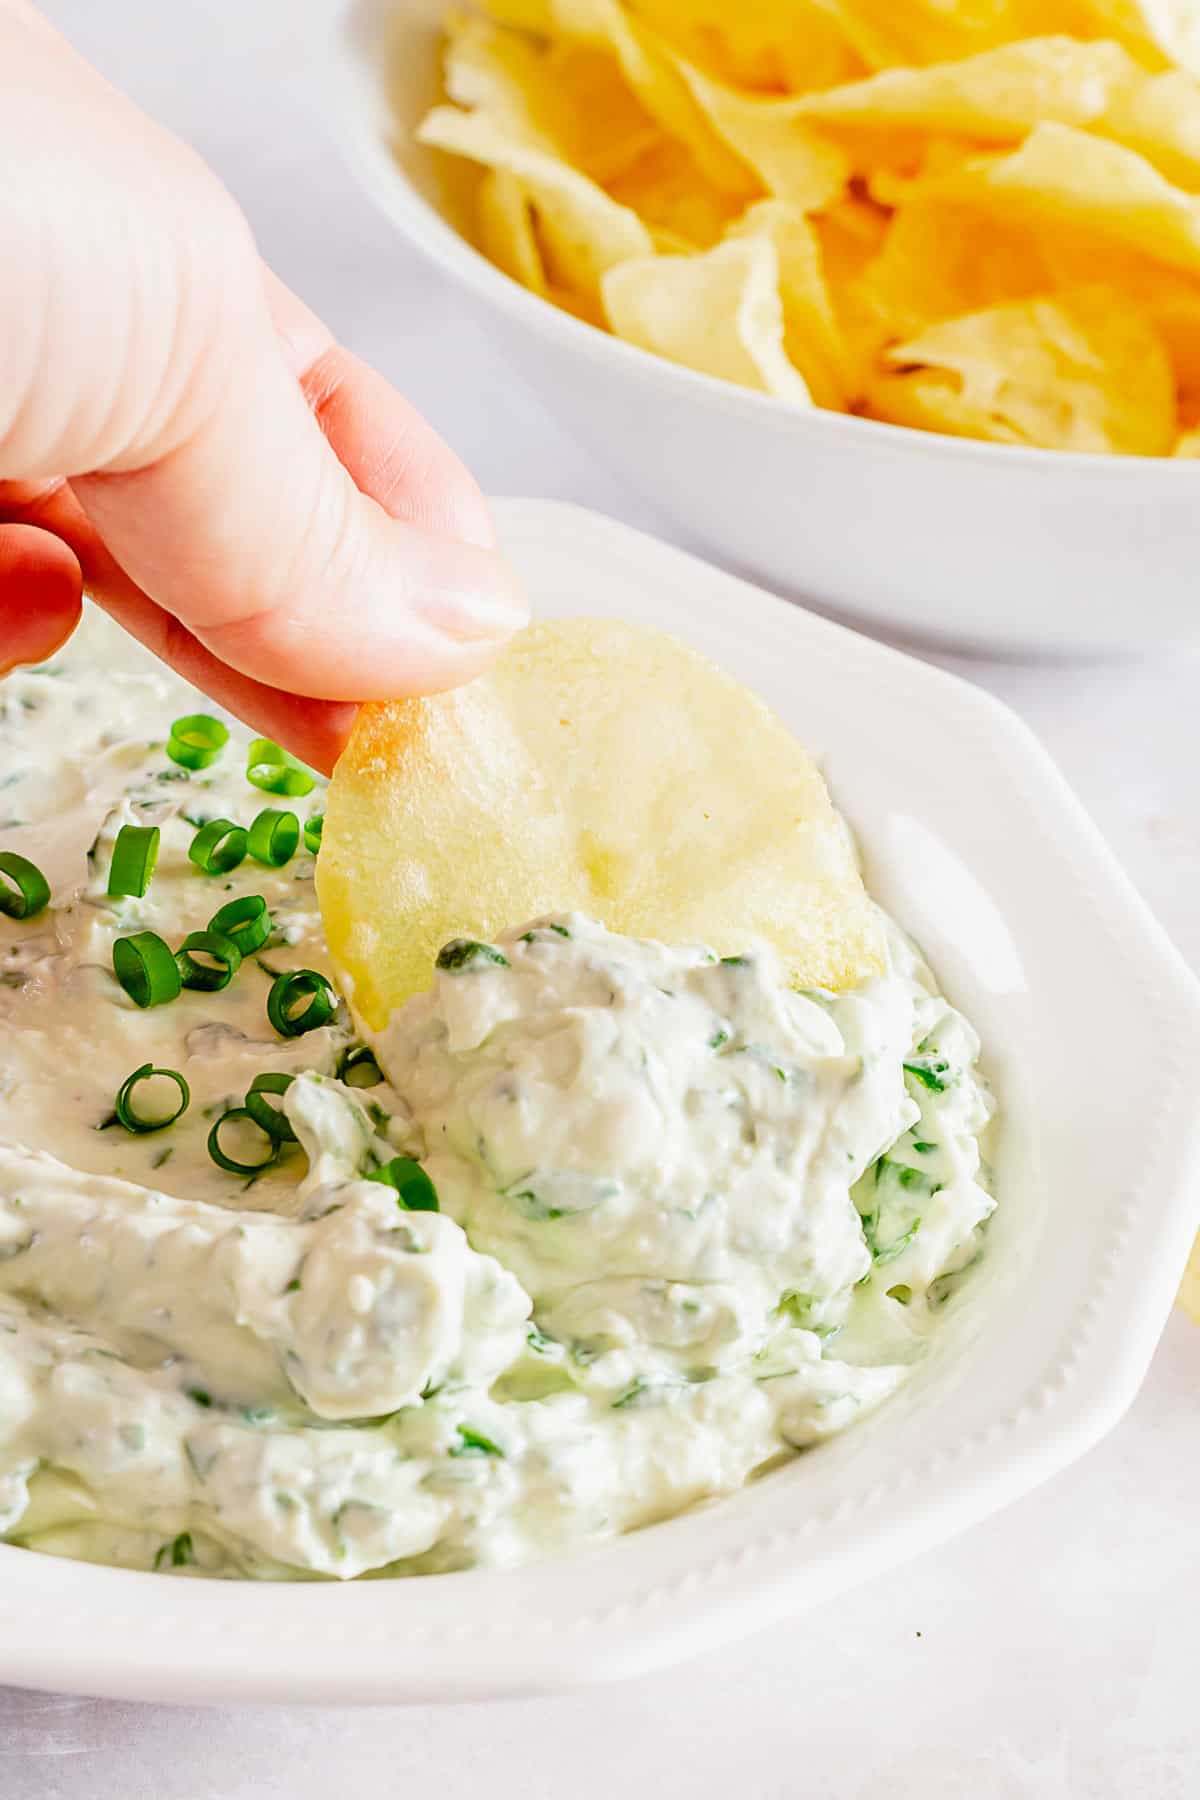 chips dunked into creamy cold spinach dip